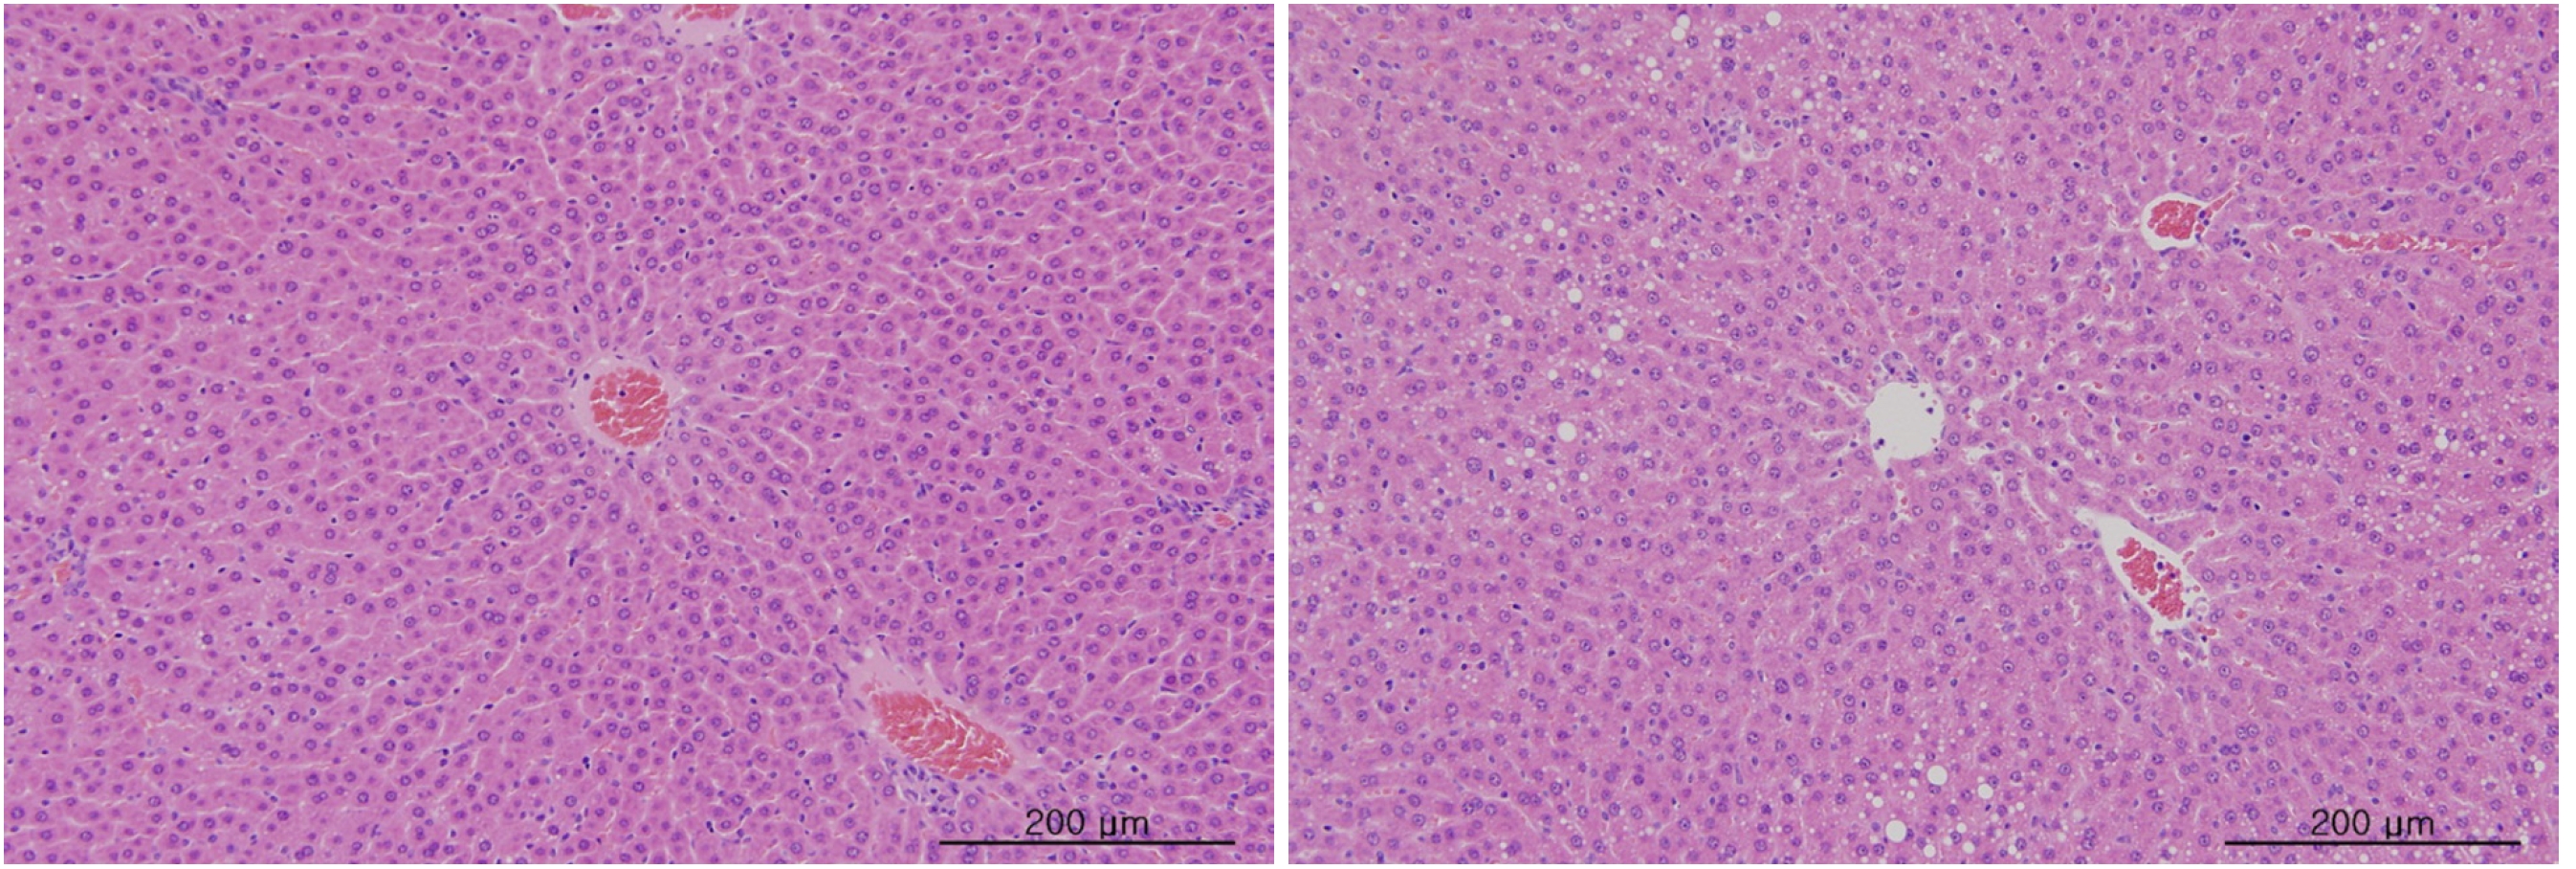 Tissue from a liver in the intravenous single-dose toxicity study on the injection of WSGP in SD rats.